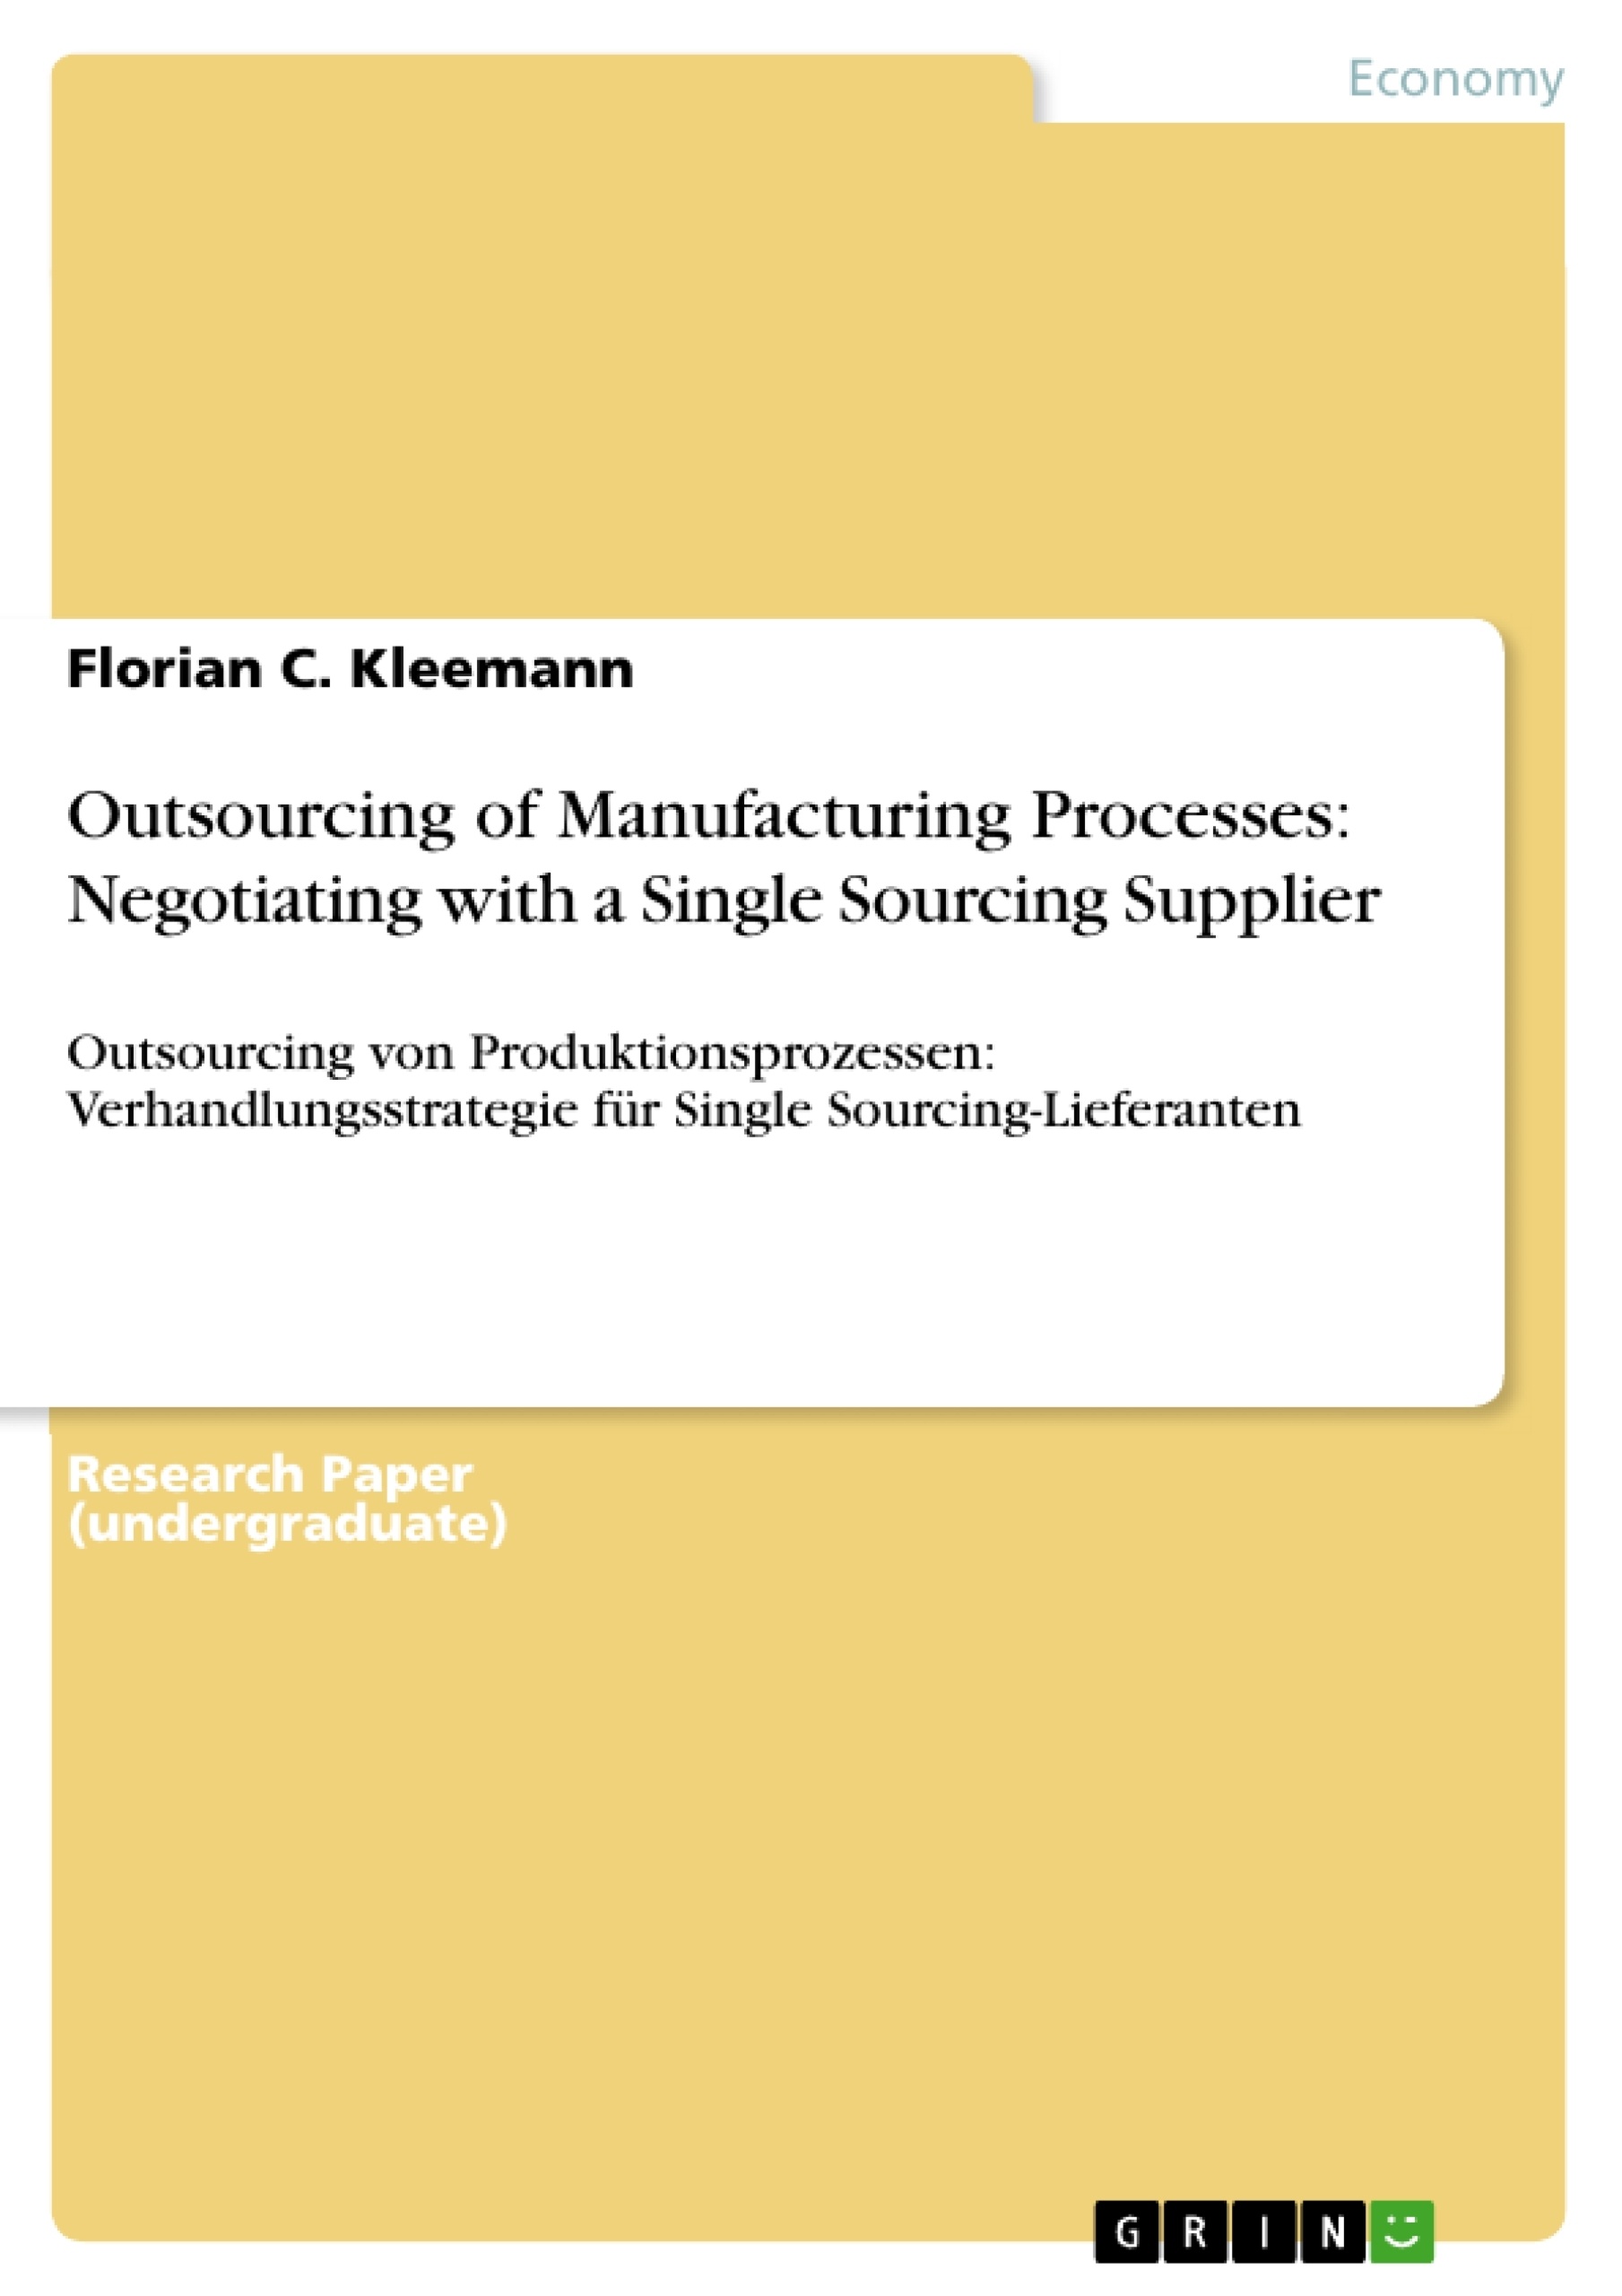 Título: Outsourcing of Manufacturing Processes: Negotiating with a Single Sourcing Supplier